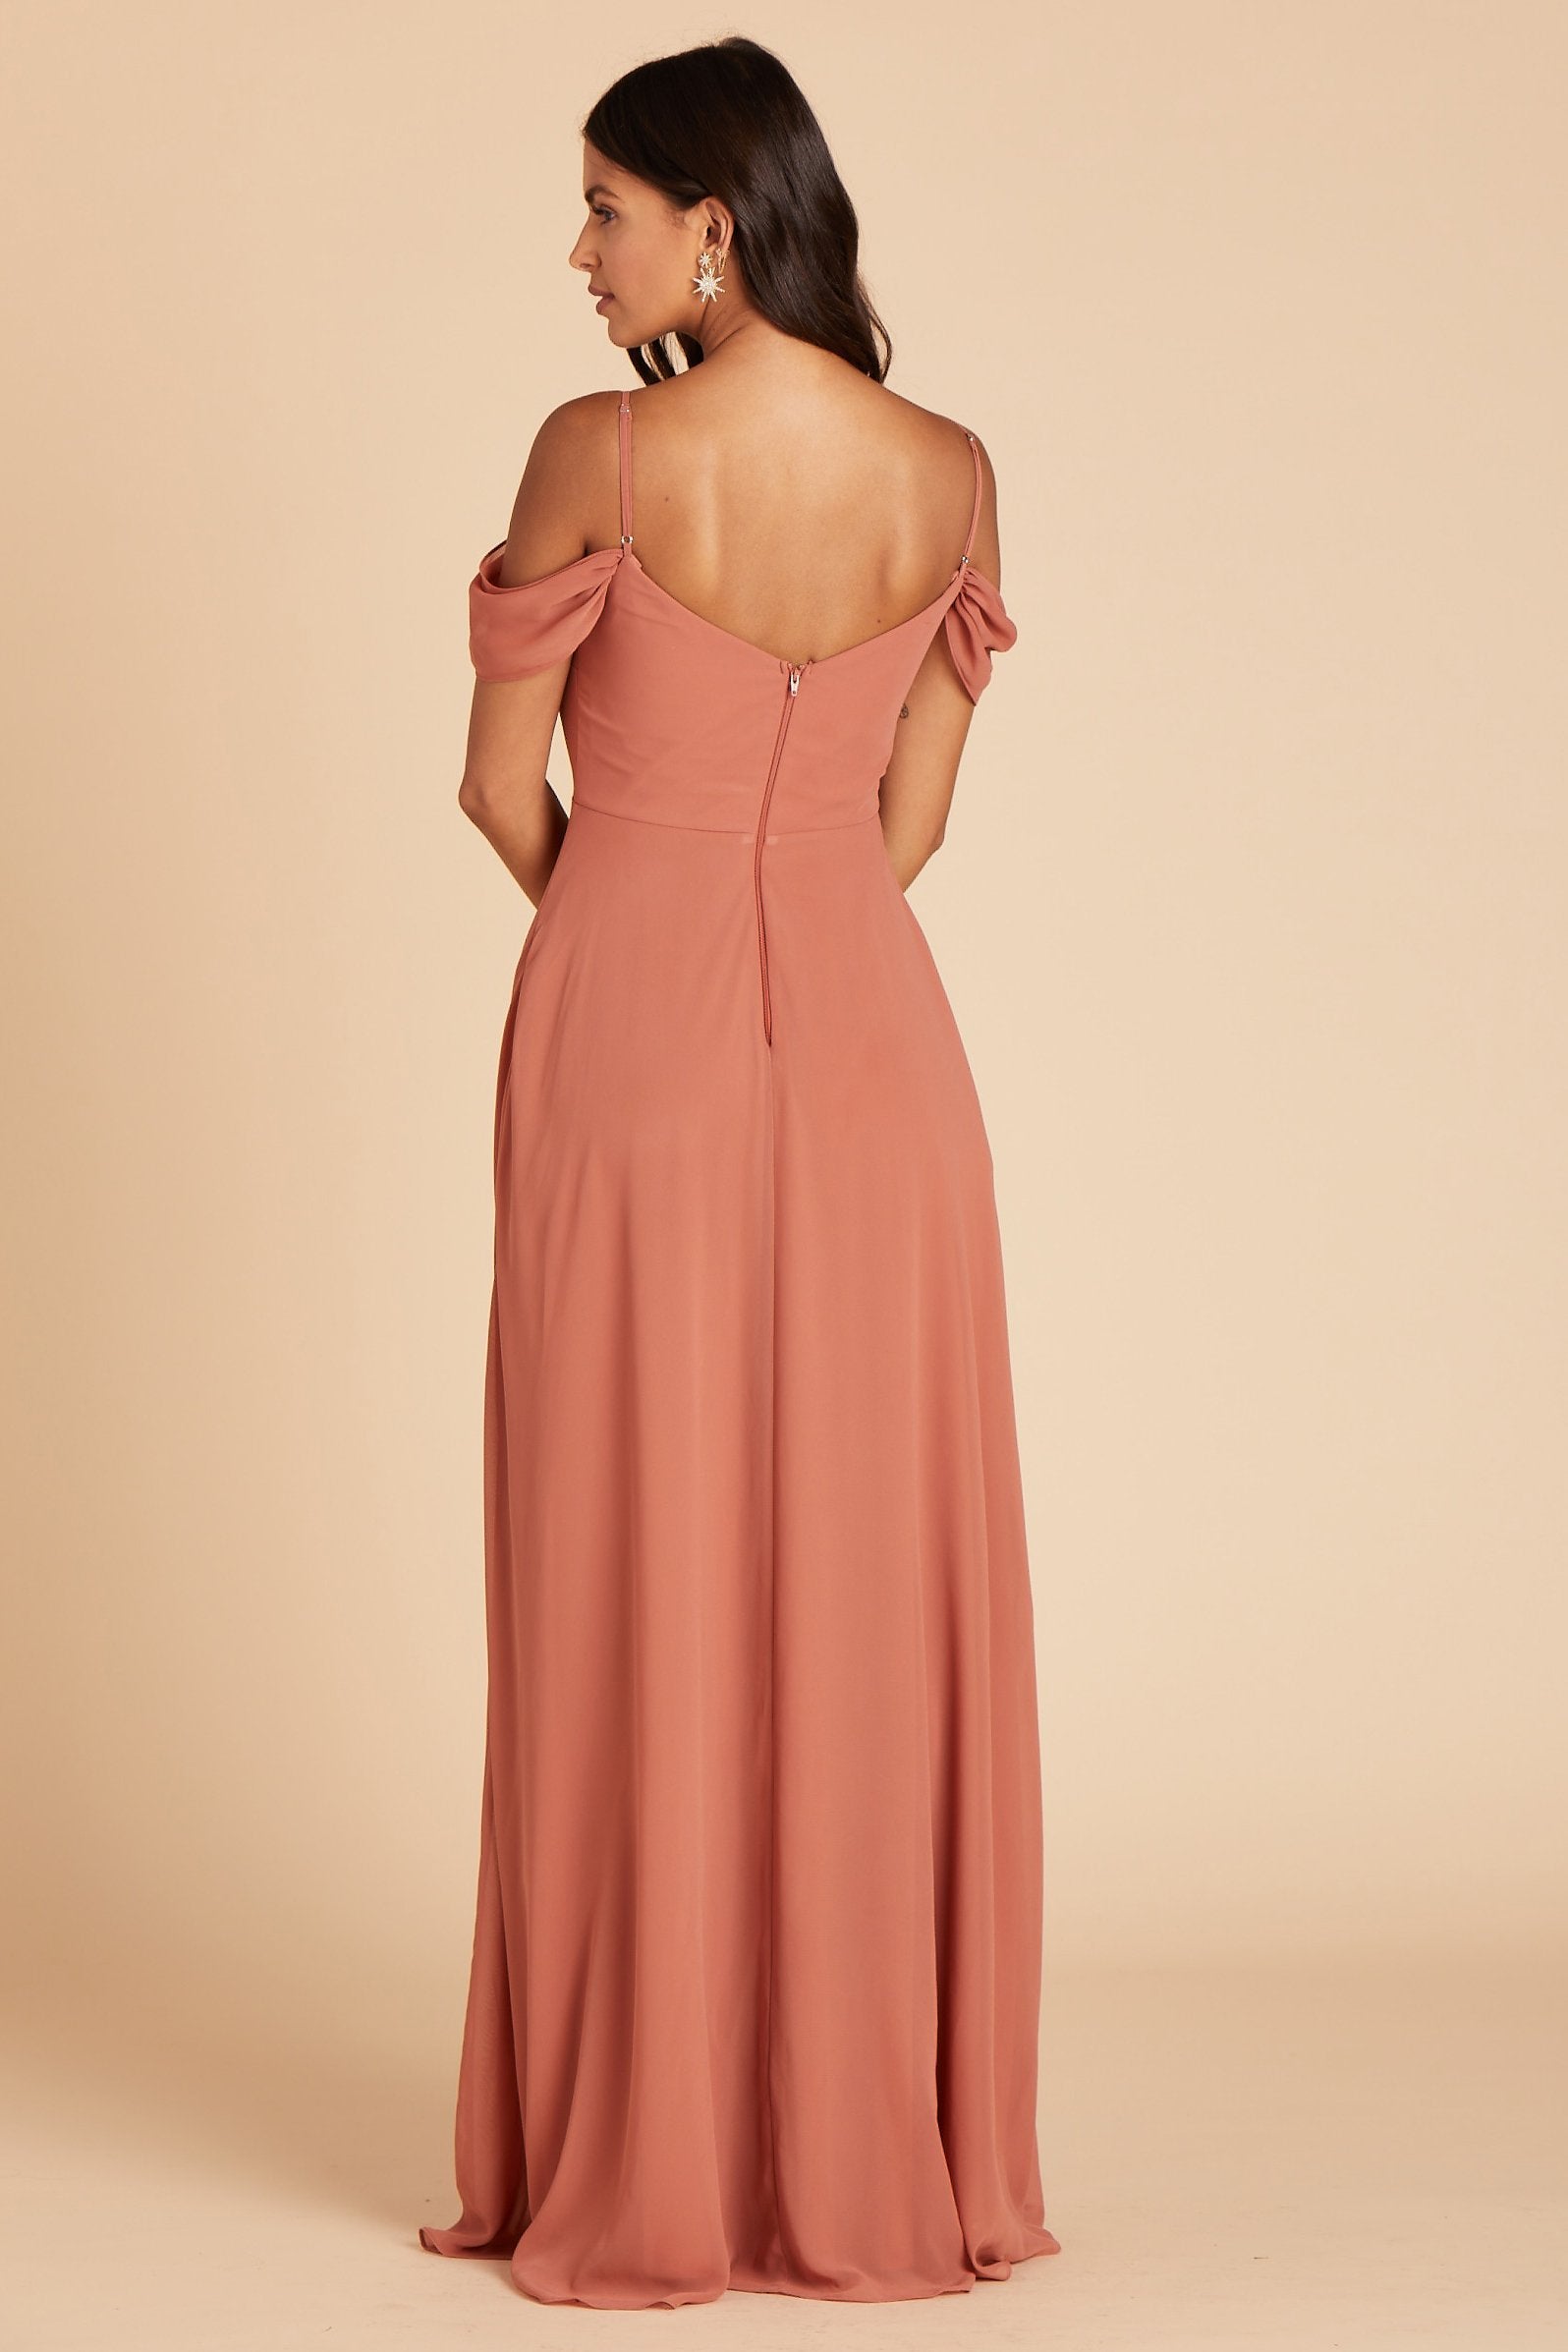 Back view of the floor-length Devin Convertible Plus Size Bridesmaid Dress in terracotta chiffon displays adjustable spaghetti straps and an open back with a slight v-cut just below the shoulder blades.